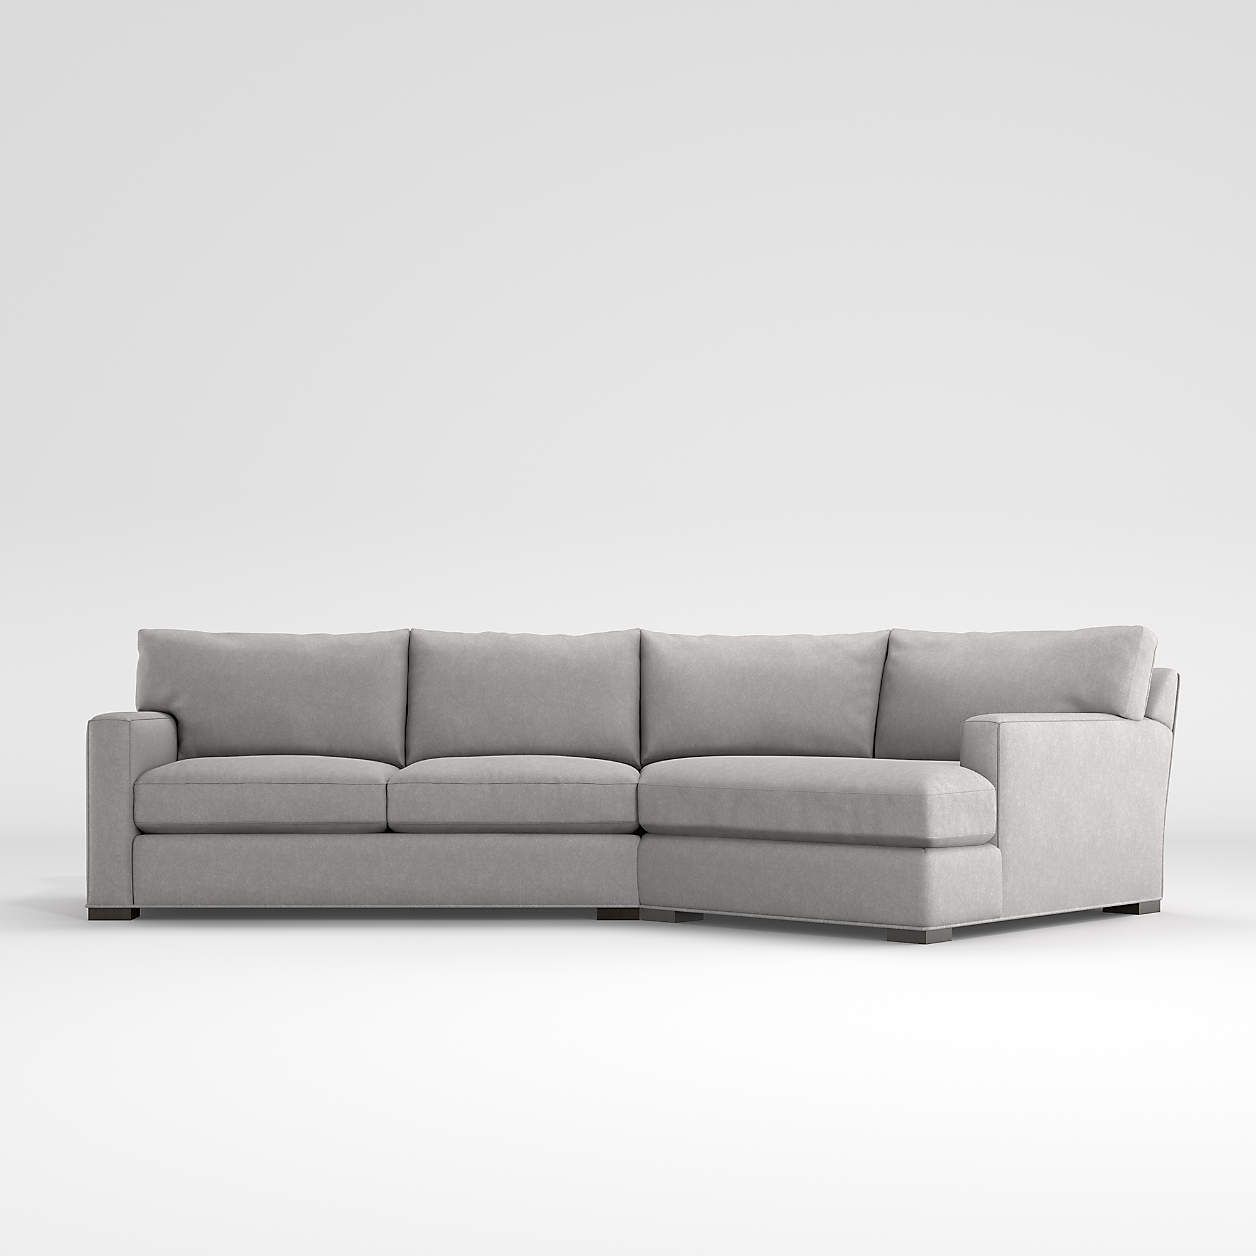 Axis 2-Piece Right Arm Angled Chaise Sectional Sofa + Reviews | Crate & Barrel | Crate & Barrel